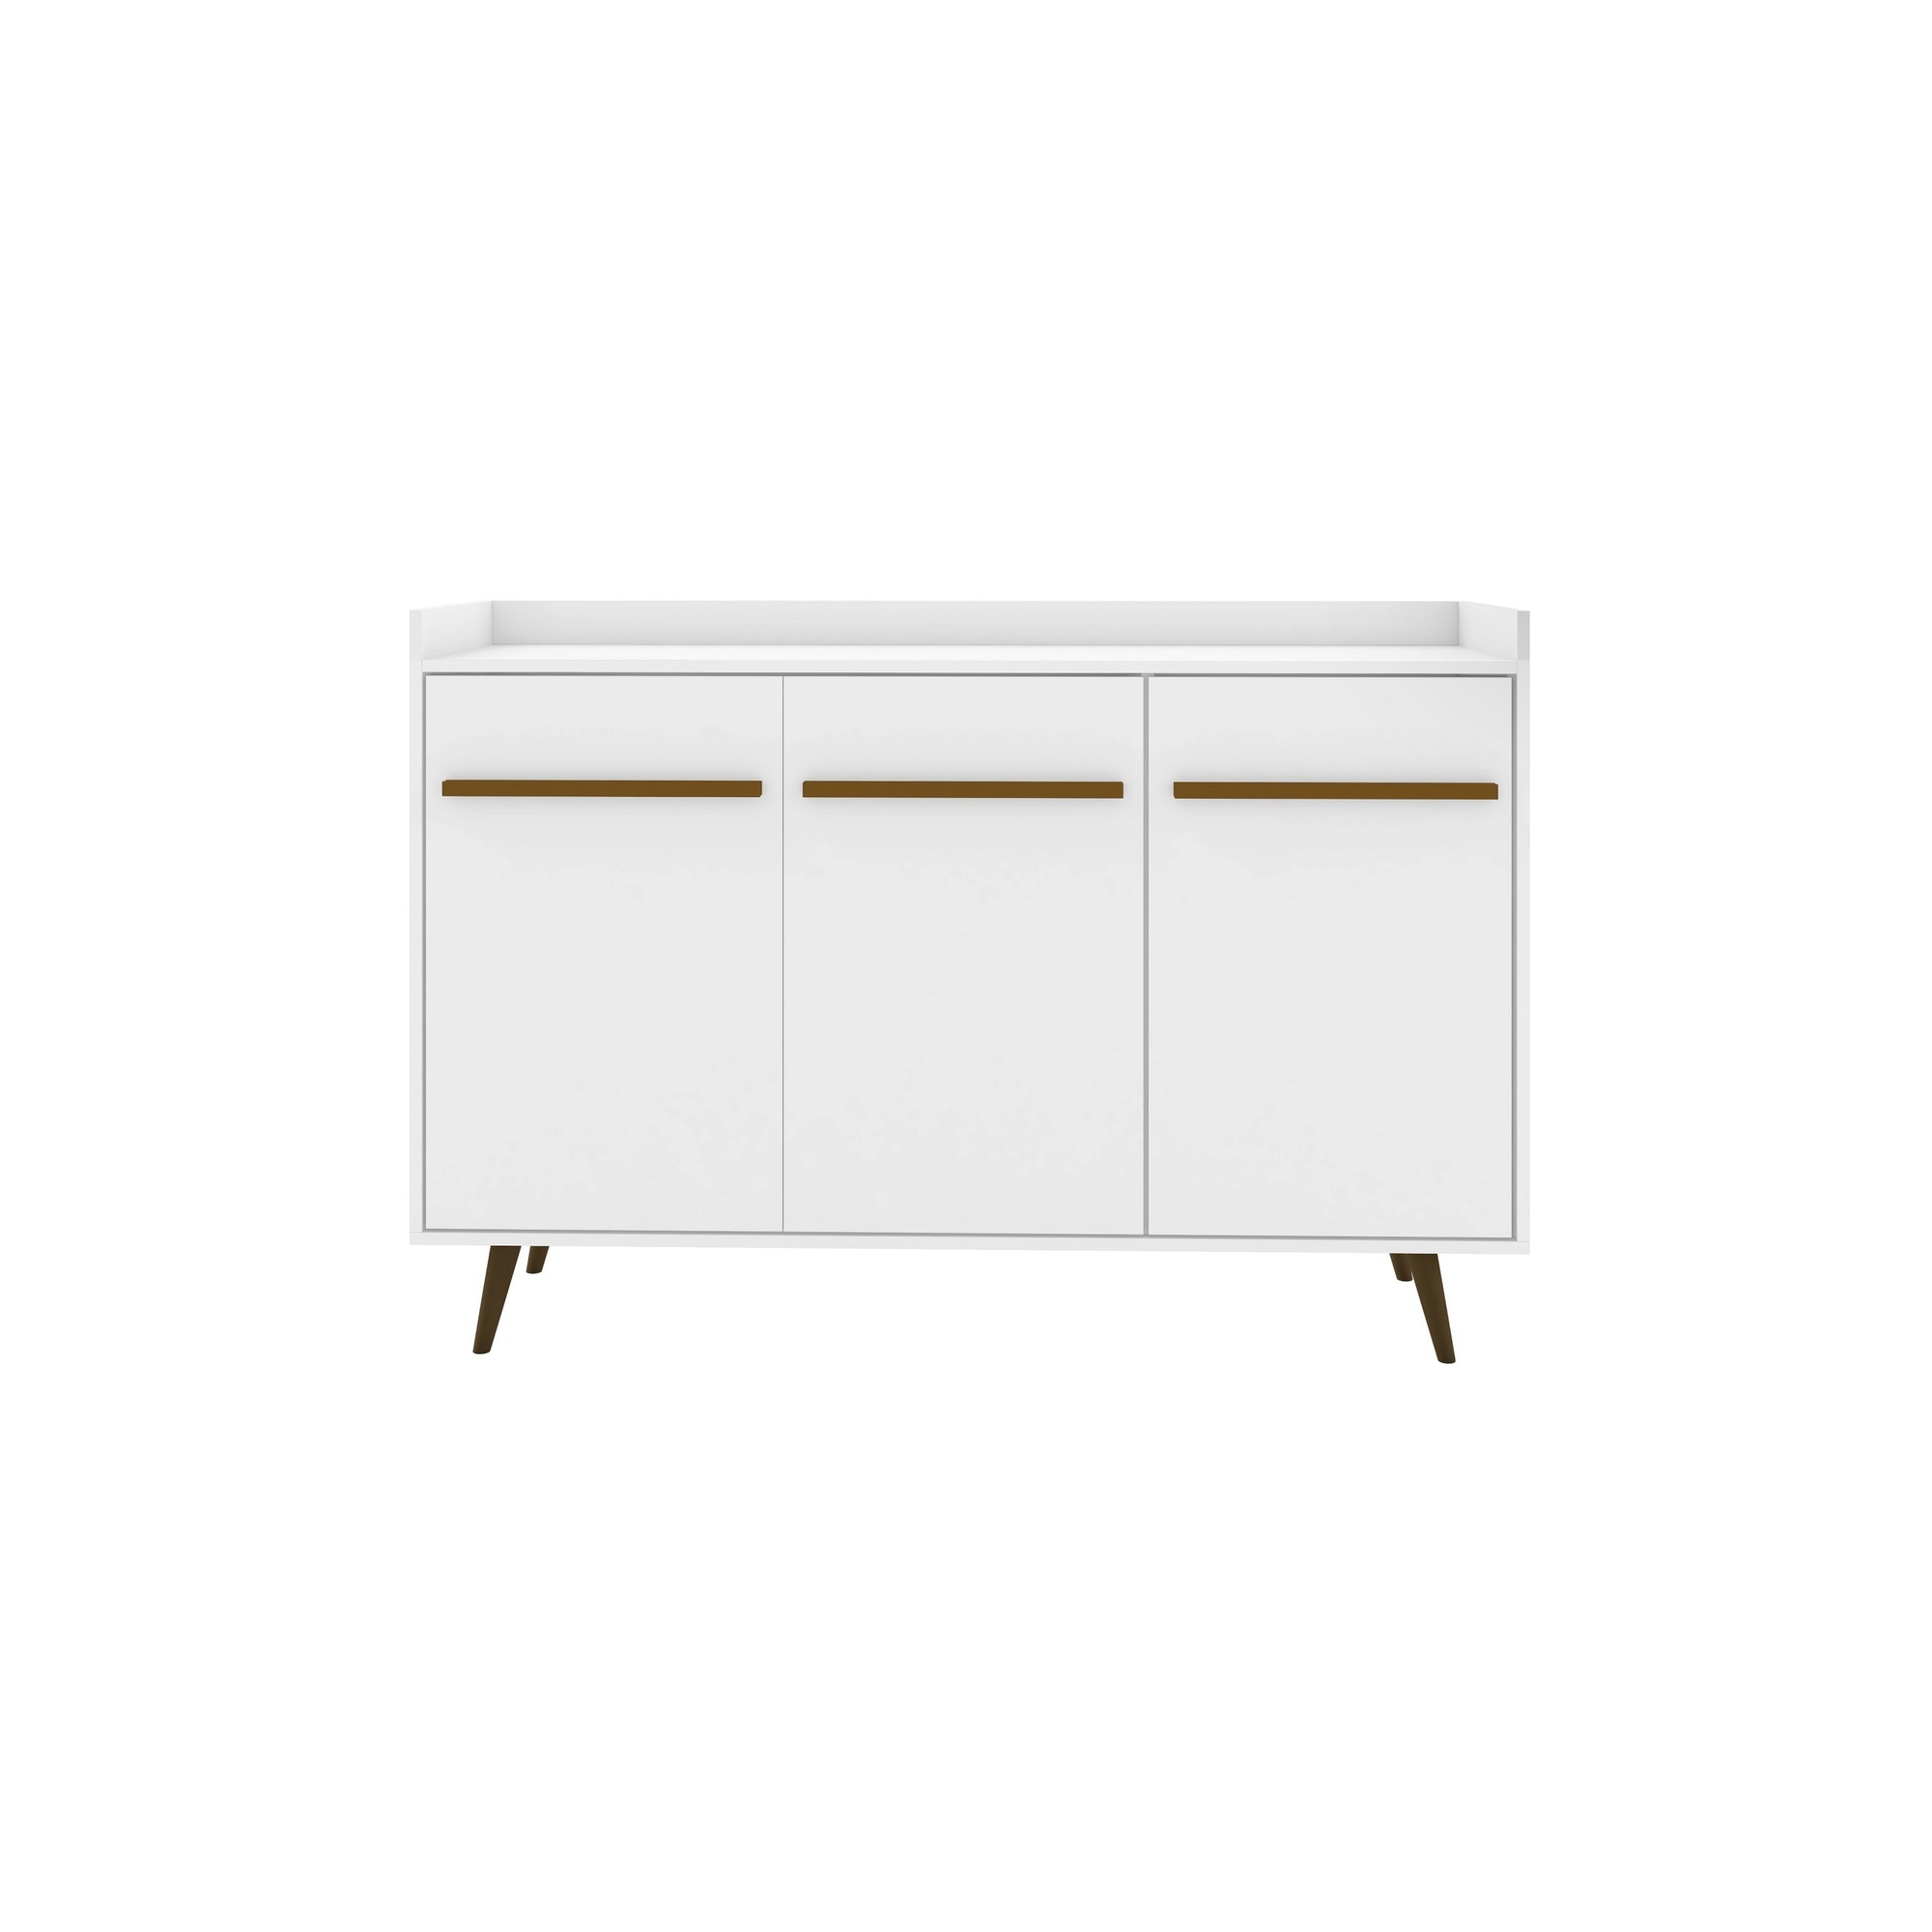 Manhattan Comfort, Bradley 53.54 Buffet Stand with 4 Shelves in White, Width 53.54 in, Height 38.58 in, Depth 14.53 in, Model 230BMC